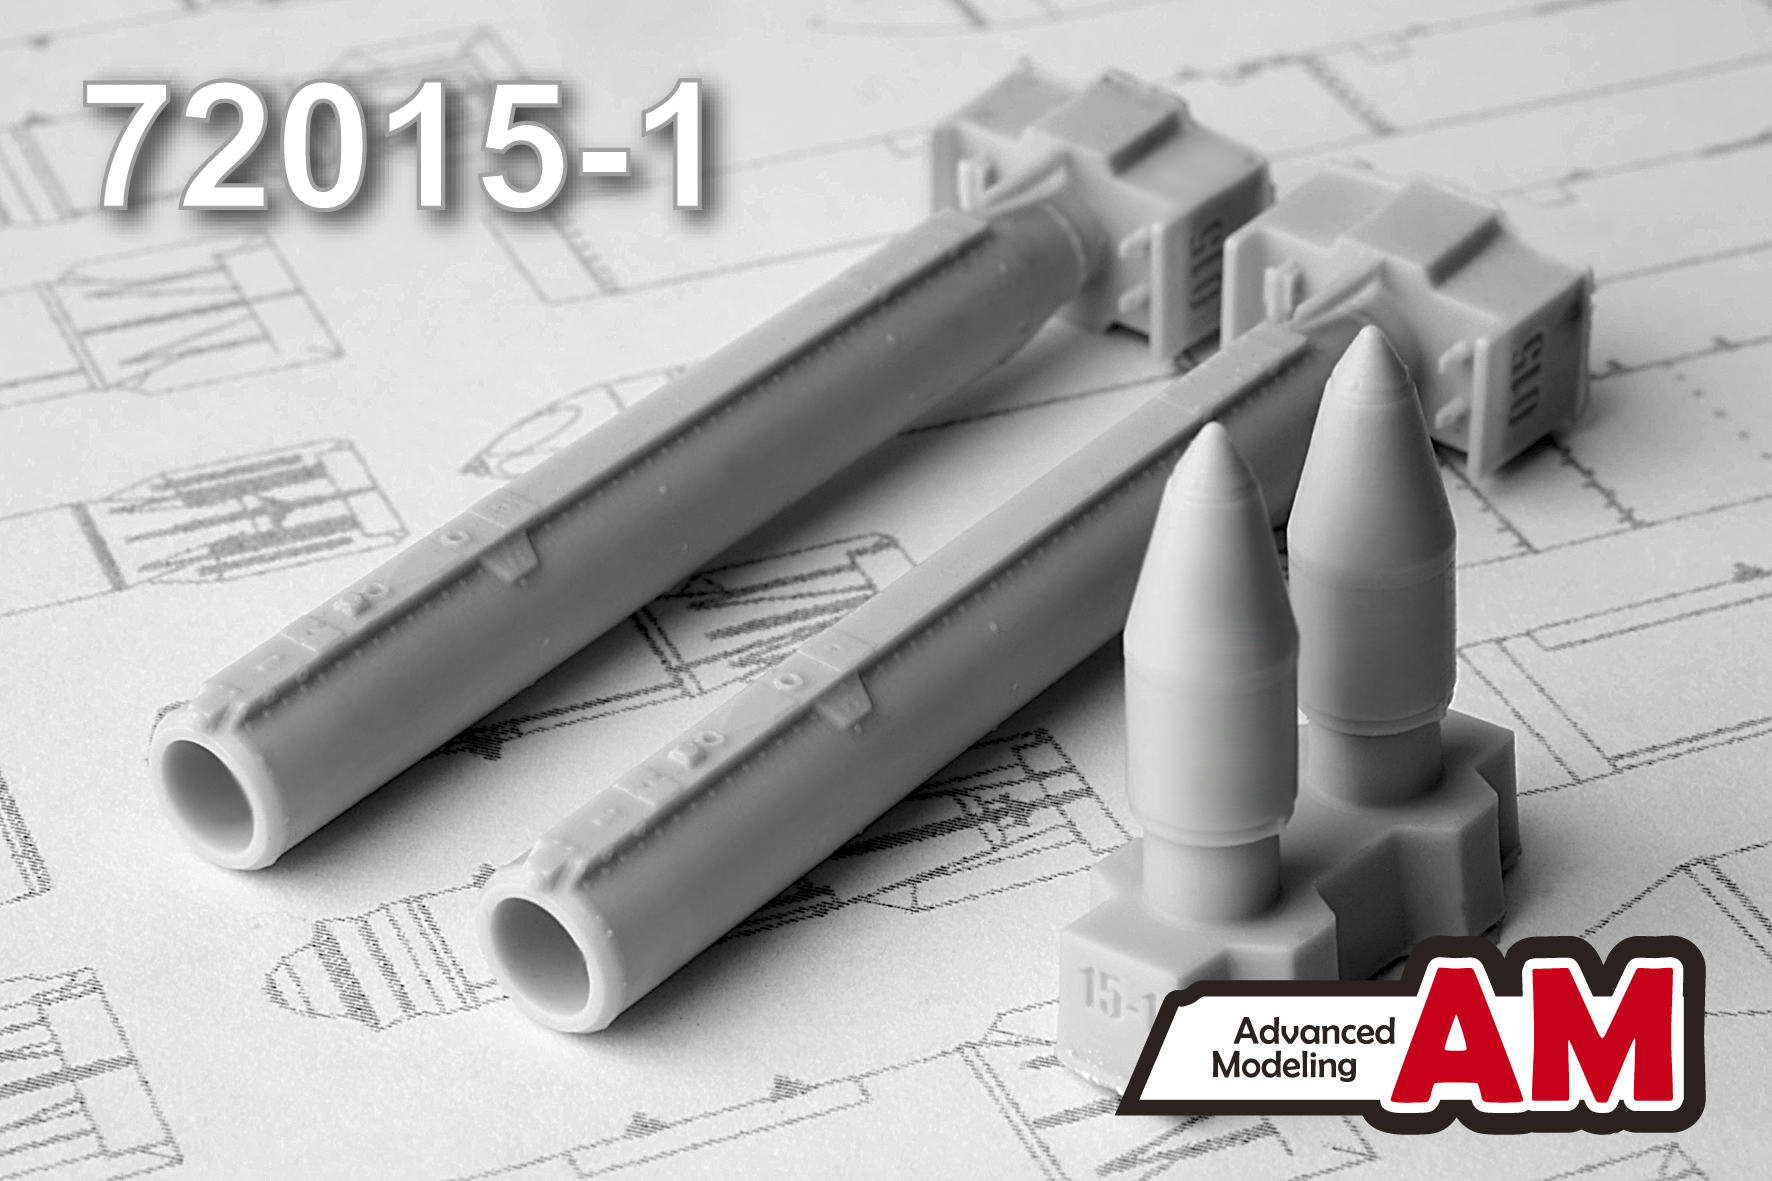 Additions (3D resin printing) 1/72 S-25-OF-PU Unguided Air-Launched Rocket (Advanced Modeling) 